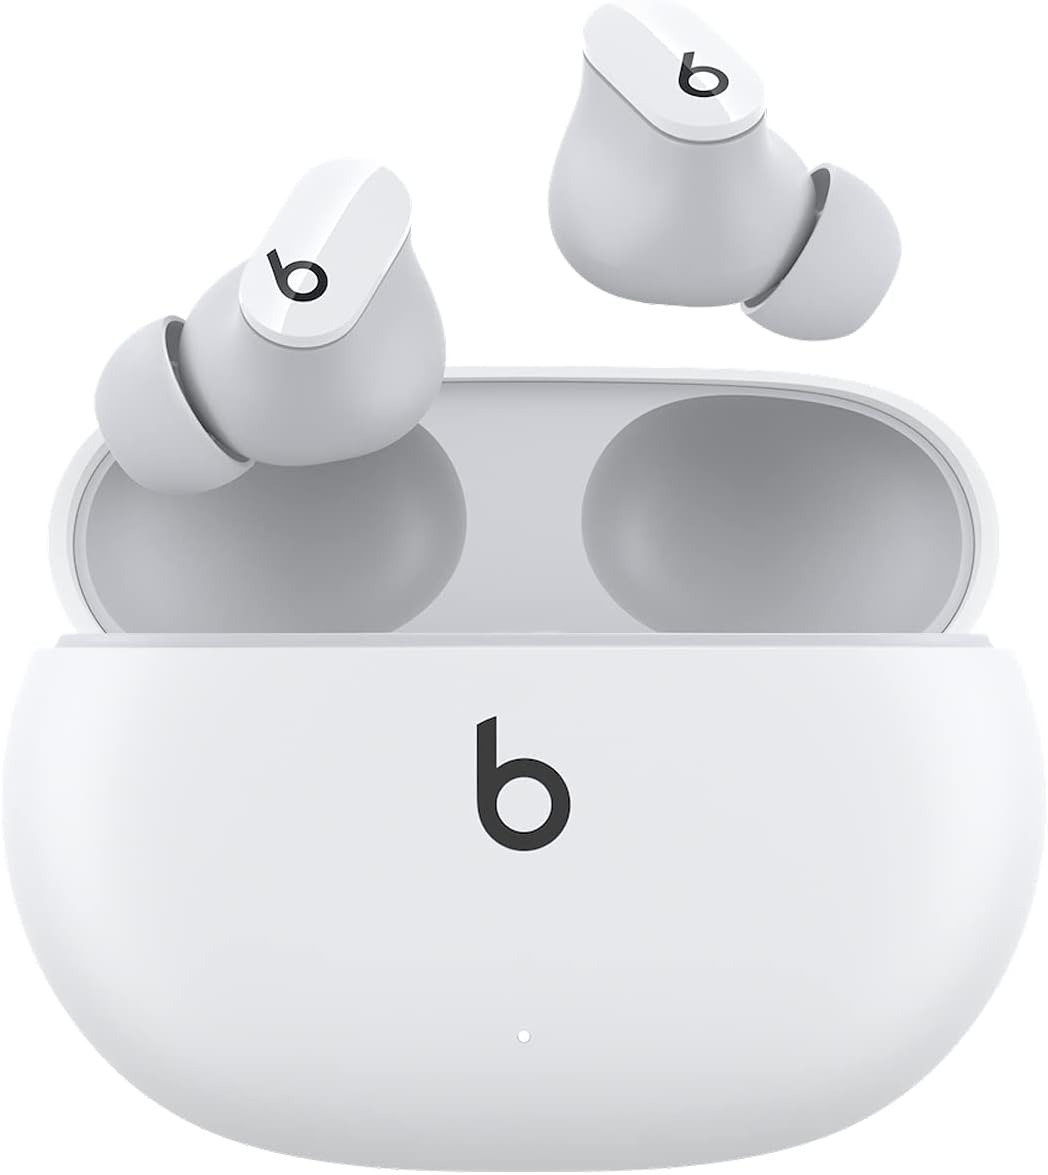 Beats Studio Buds - True Wireless Noise Cancelling Earbuds - Compatible With Apple  Android, Built-In Microphone, Ipx4 Rating, Sweat Resistant Earphones, Class 1 Bluetooth Headphones - White